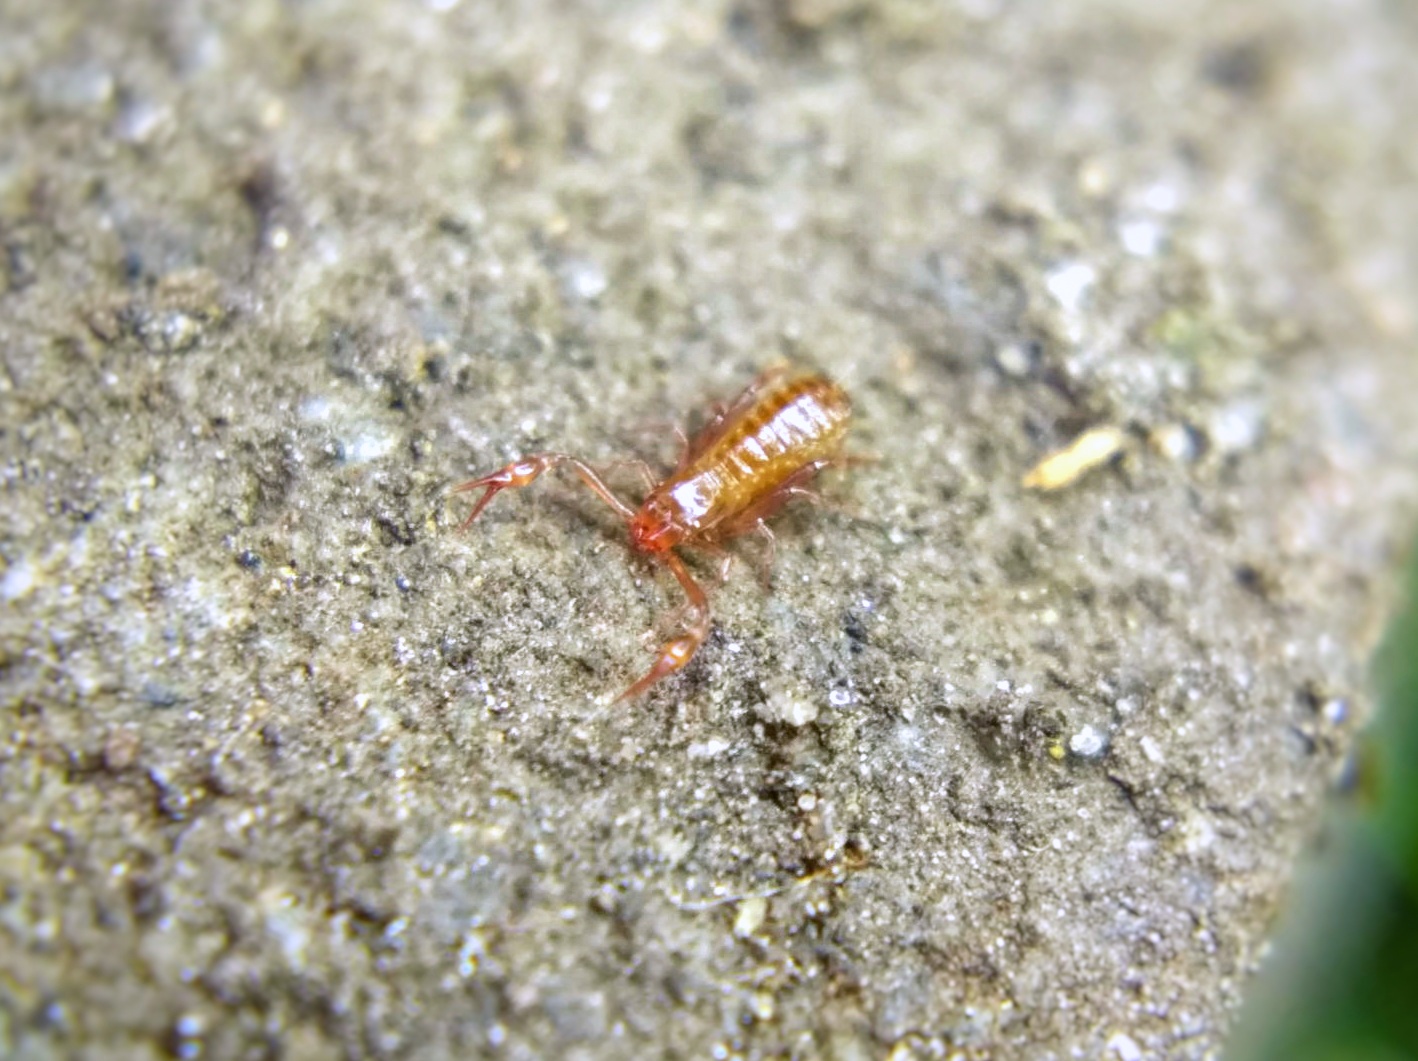 A reddish-brown pseudoscorpion—a tiny arachnid that looks kind of like a mite with the claws of a scorpion.